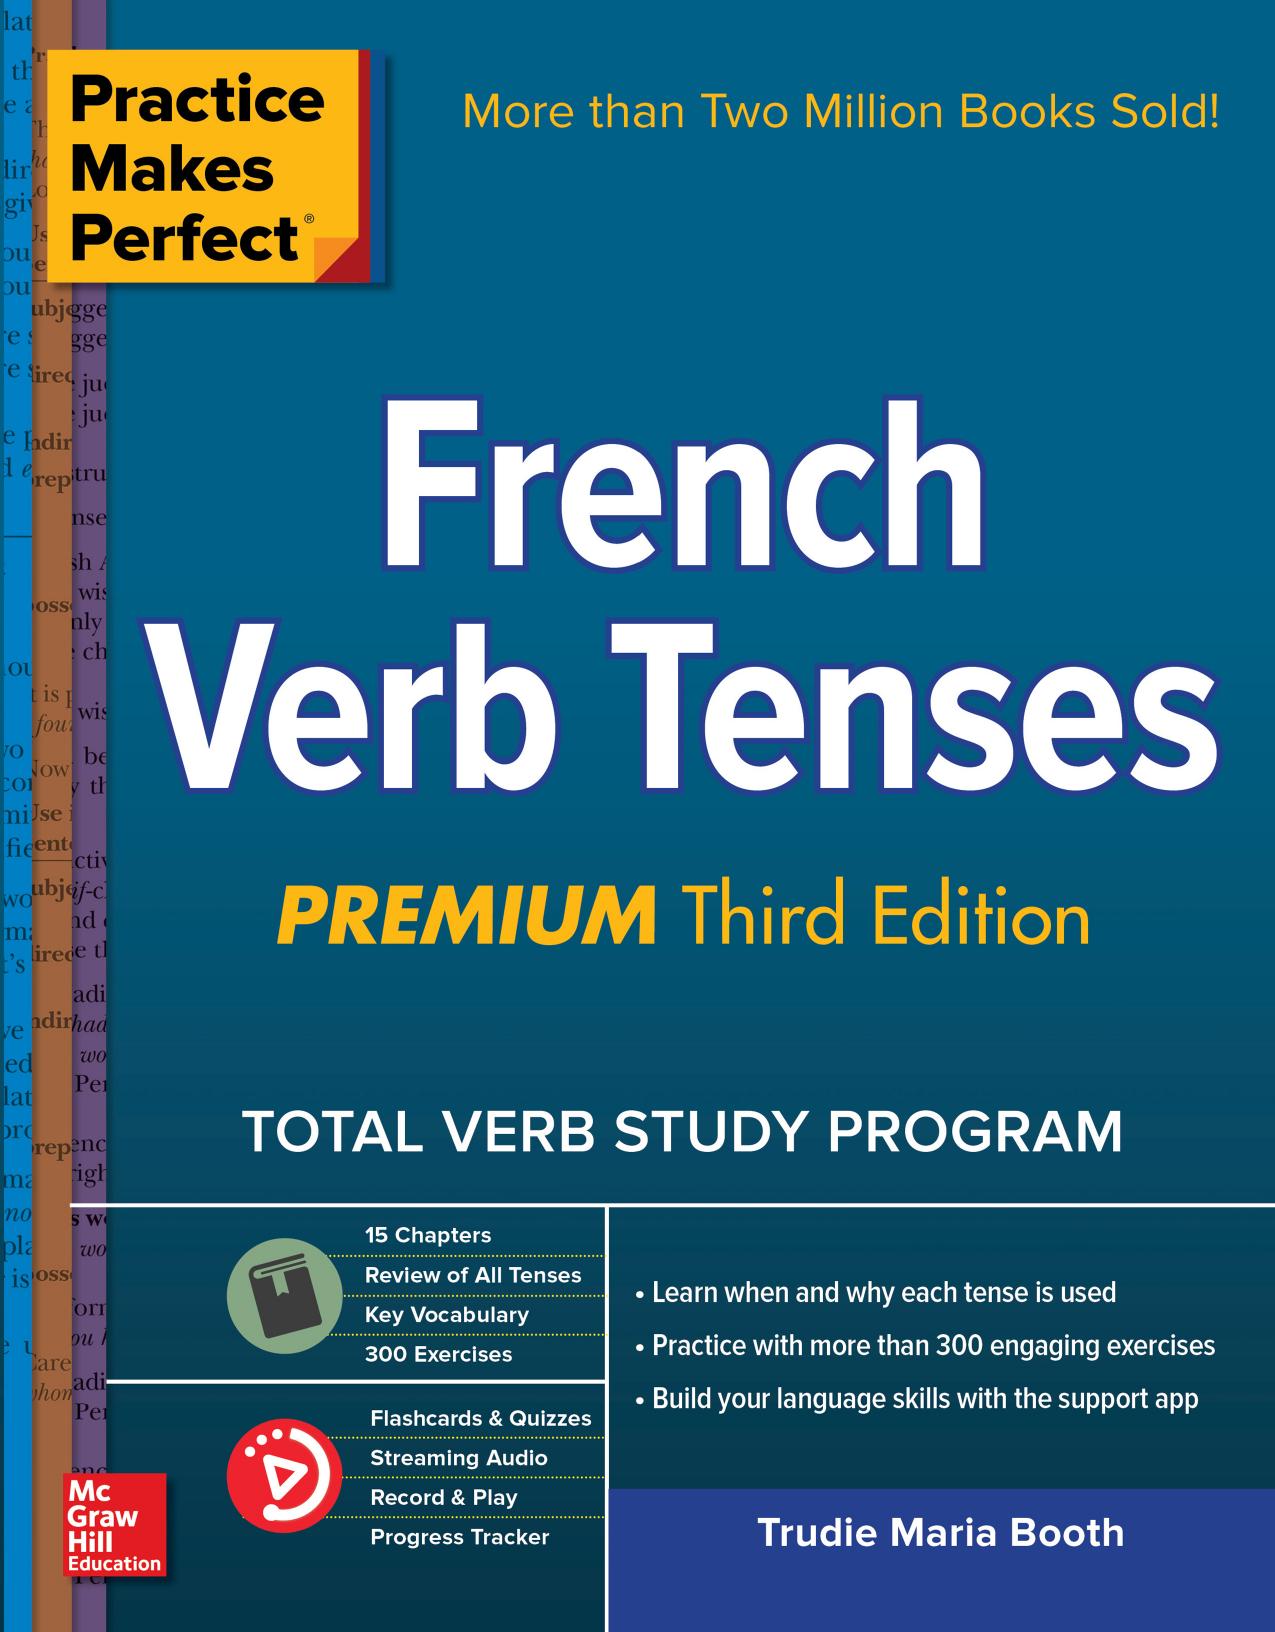 practice-makes-perfect-french-verb-tenses-premium-3rd-edition-softarchive